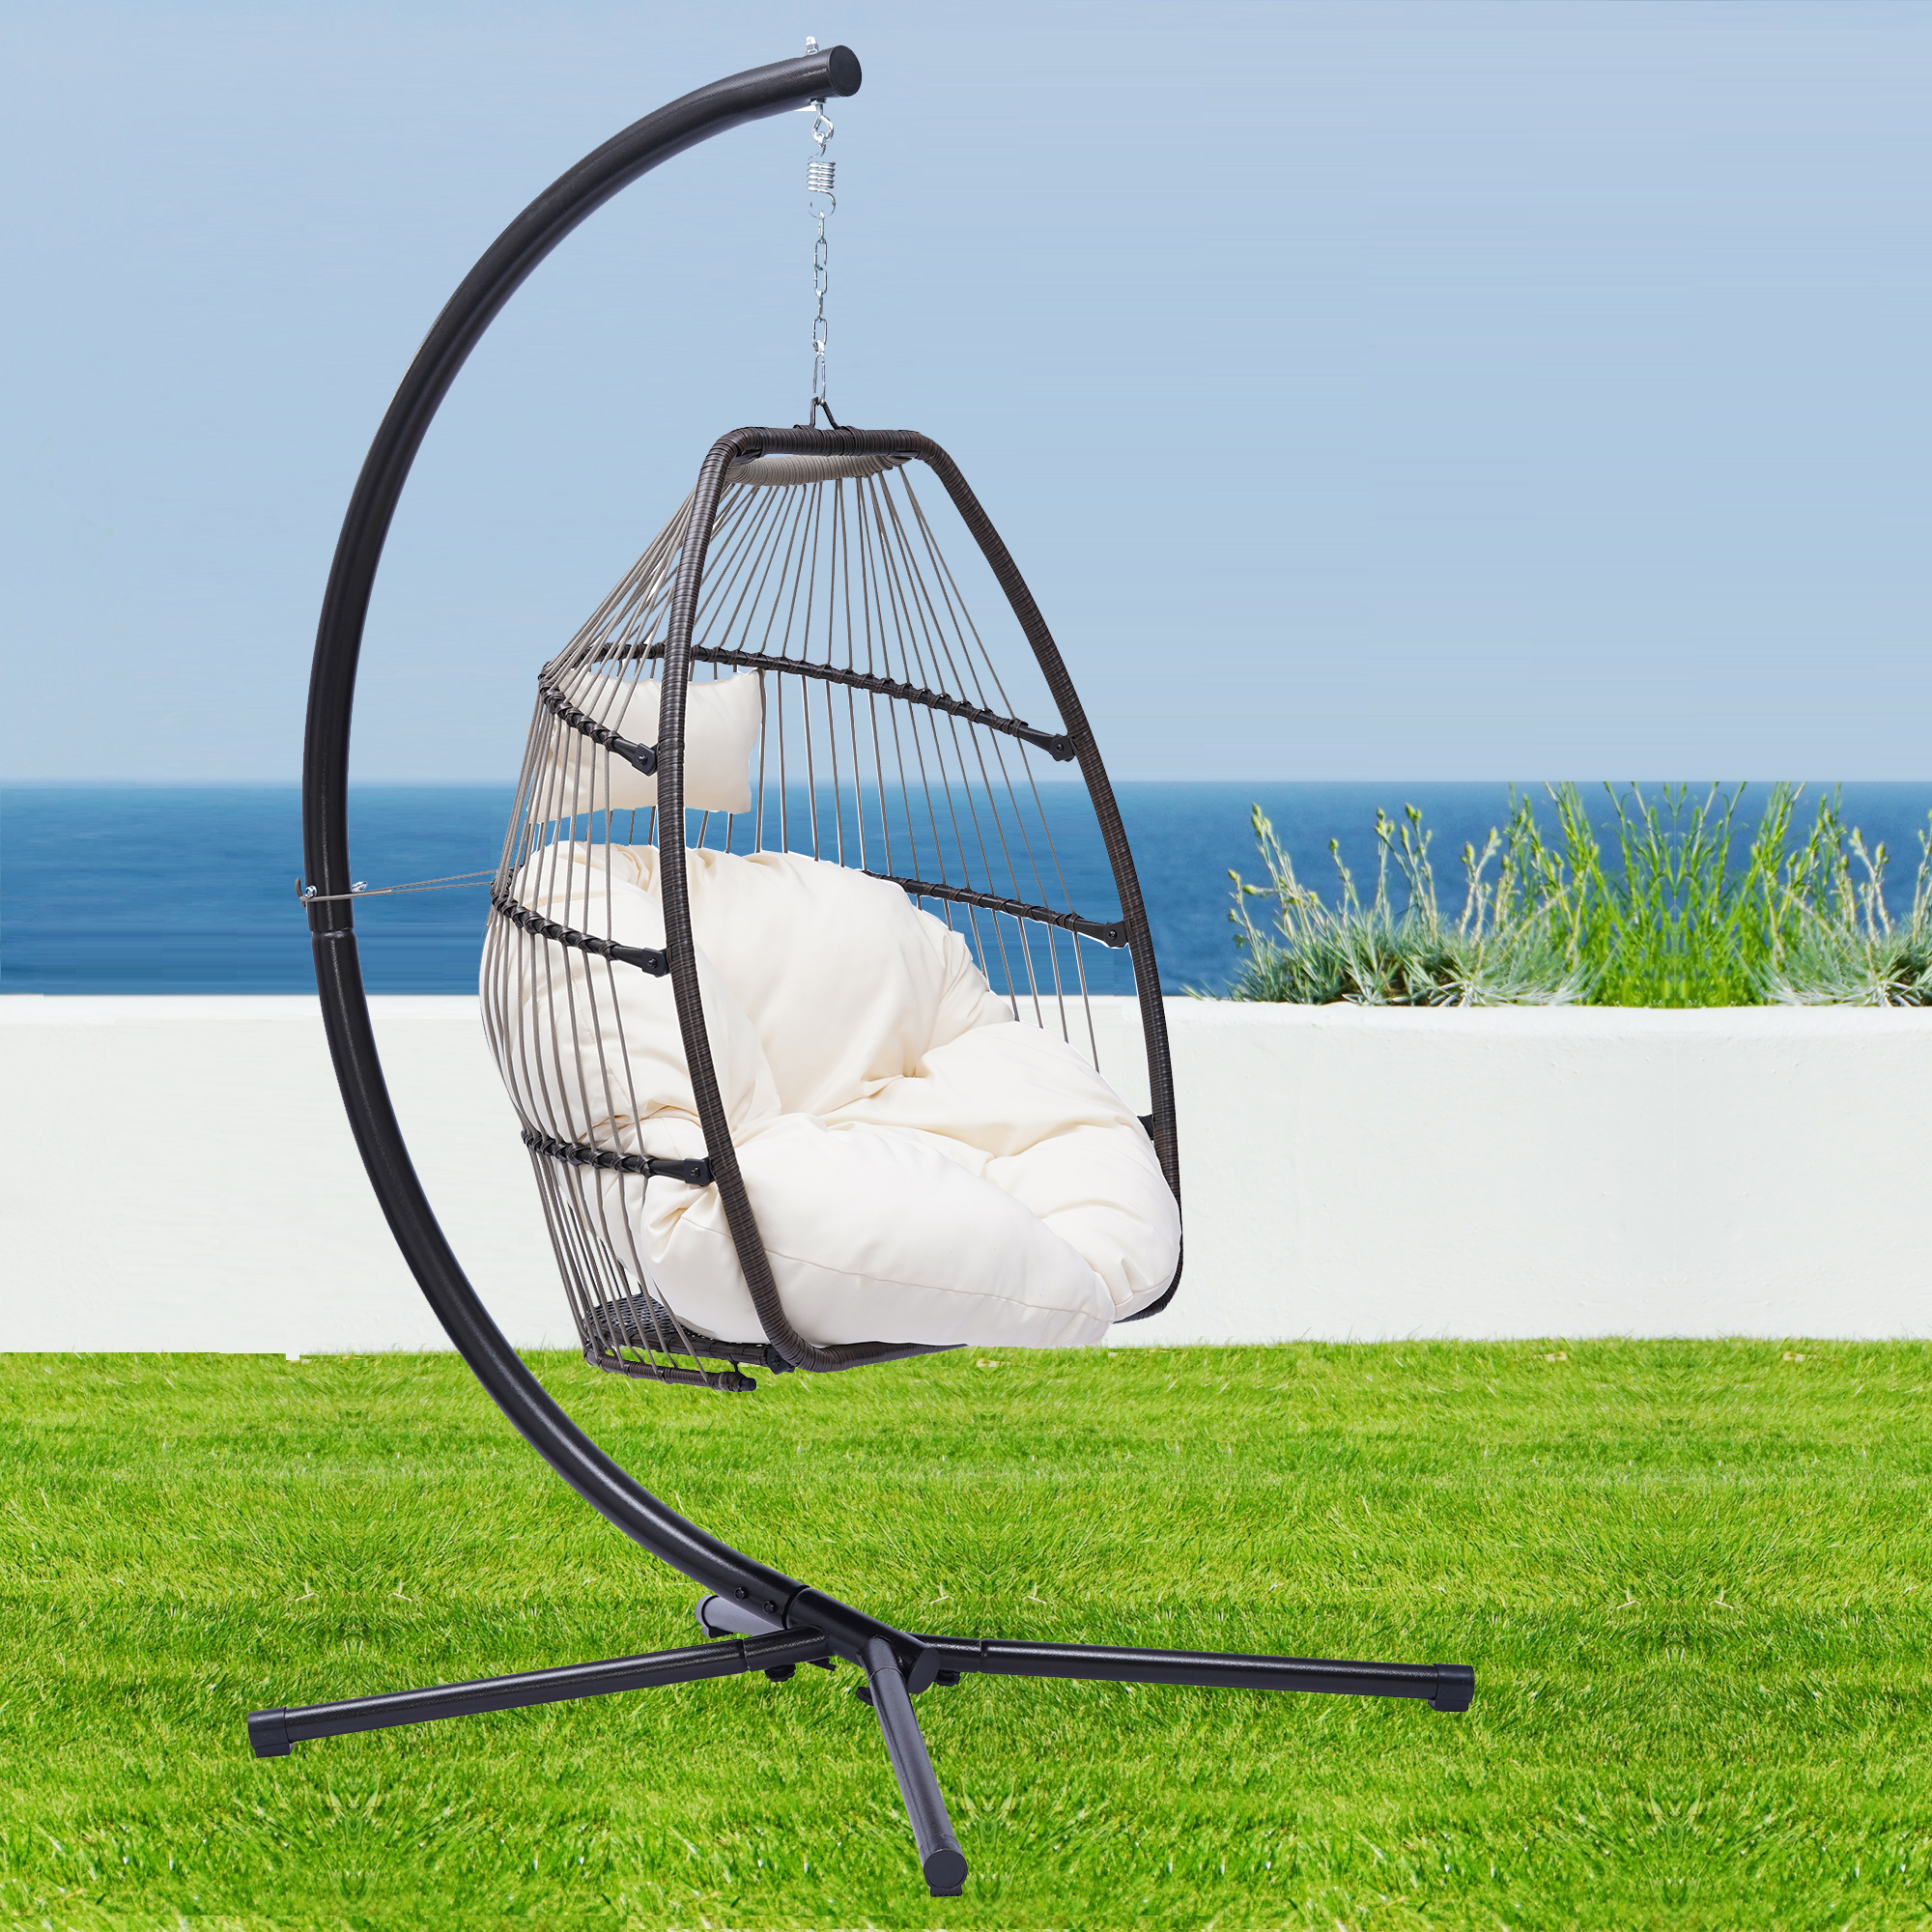 Outdoor Patio Furniture, Hanging Egg Chair with Stand, Rattan Wicker Egg Hammock Chair with Hanging Kits, Swinging Egg Chair for Indoor, Bedroom, Patio, Garden, Balcony, Beige Cushion, W11034 - image 1 of 6